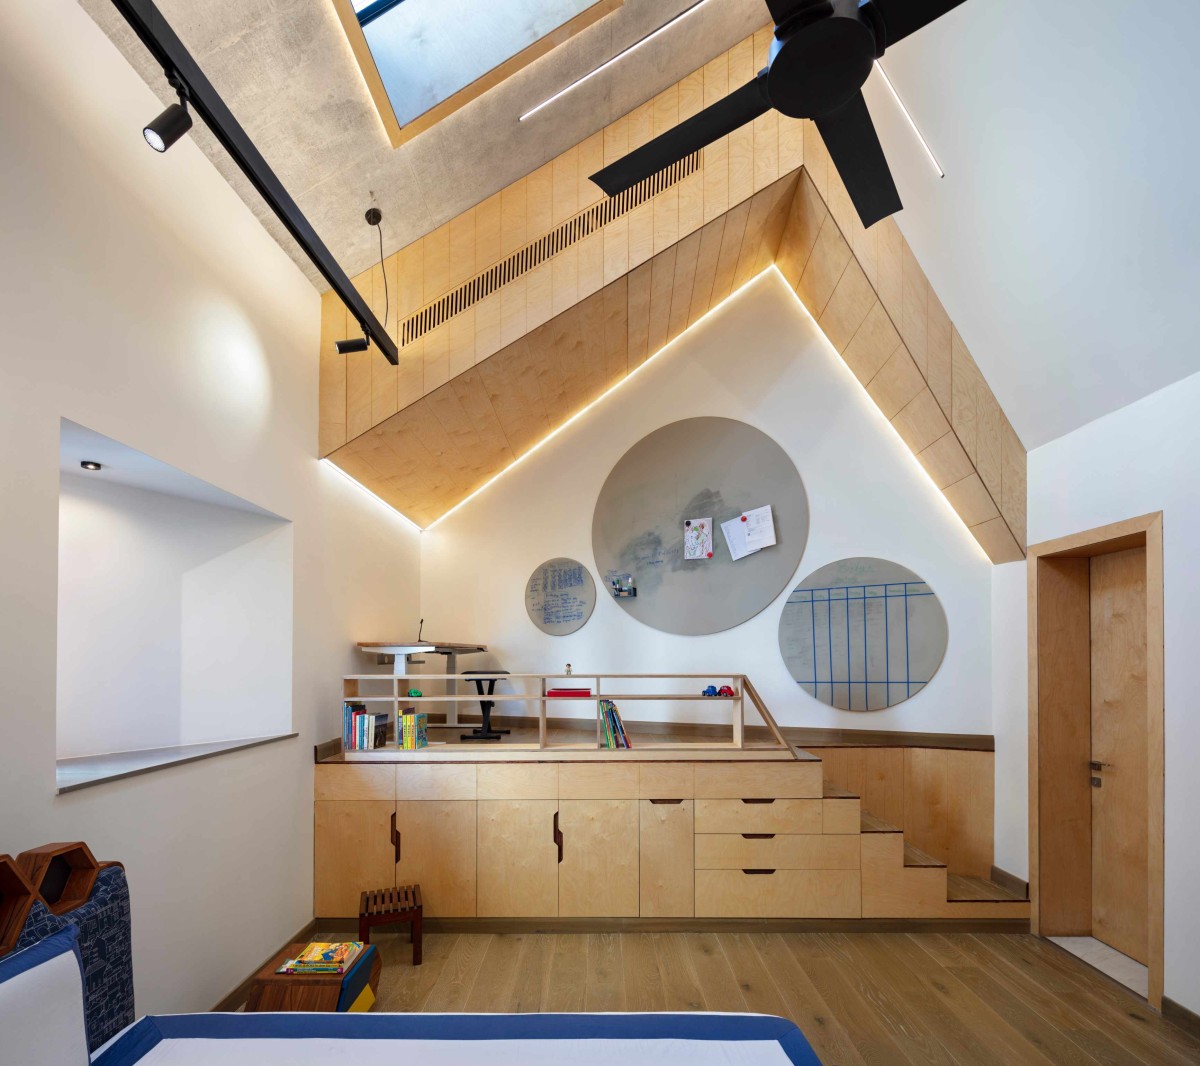 Bedroom and study area of Chromatic House by Anagram Architects